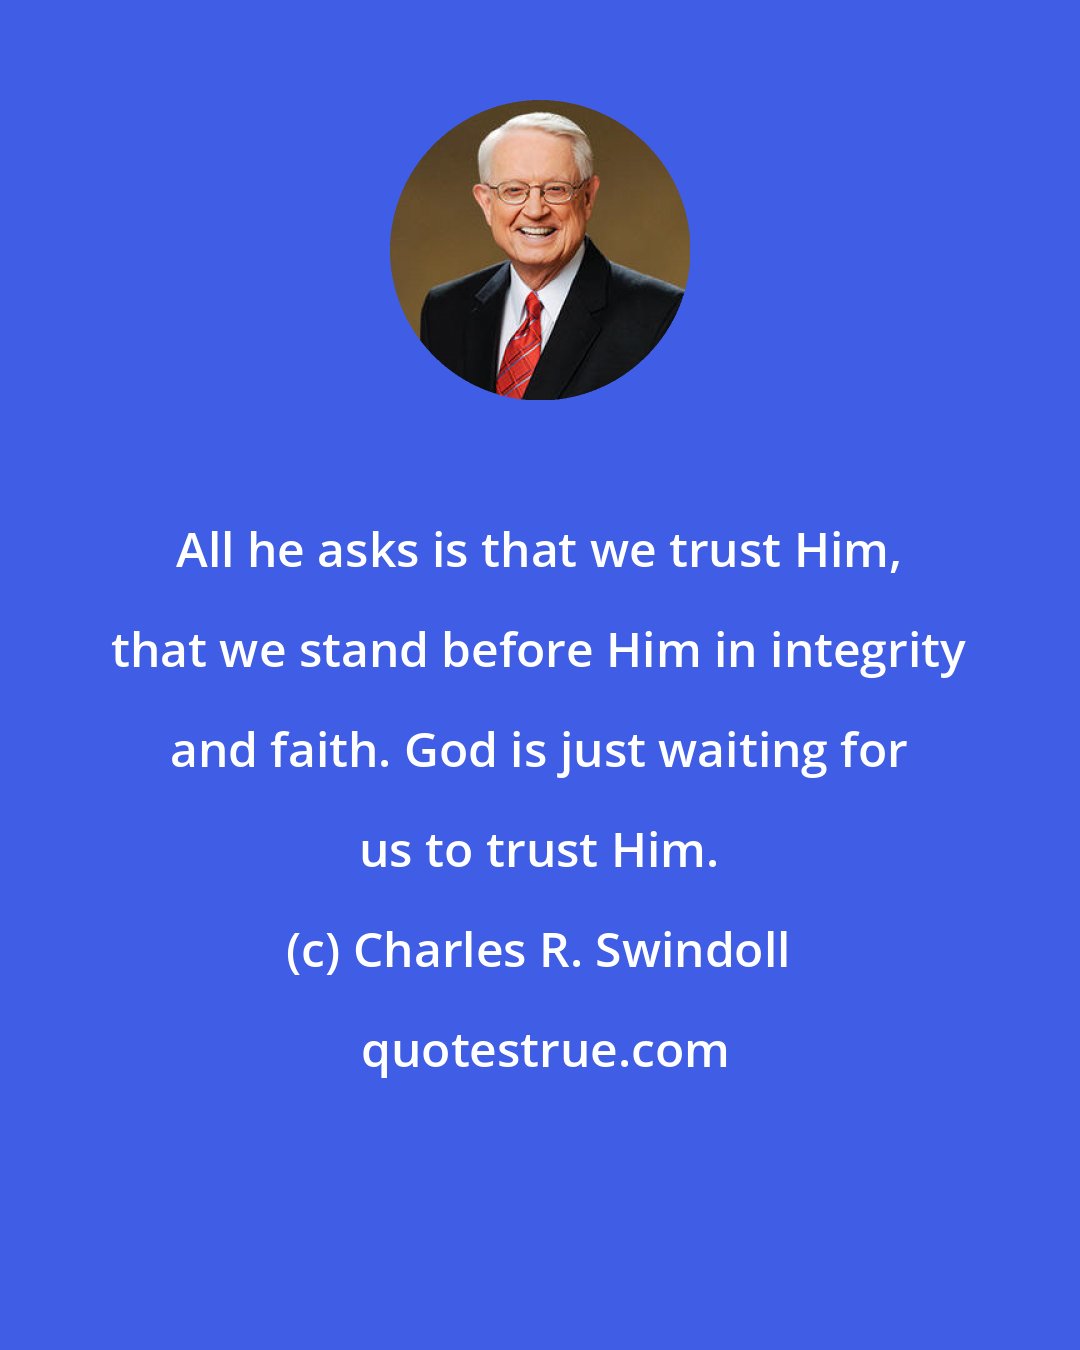 Charles R. Swindoll: All he asks is that we trust Him, that we stand before Him in integrity and faith. God is just waiting for us to trust Him.